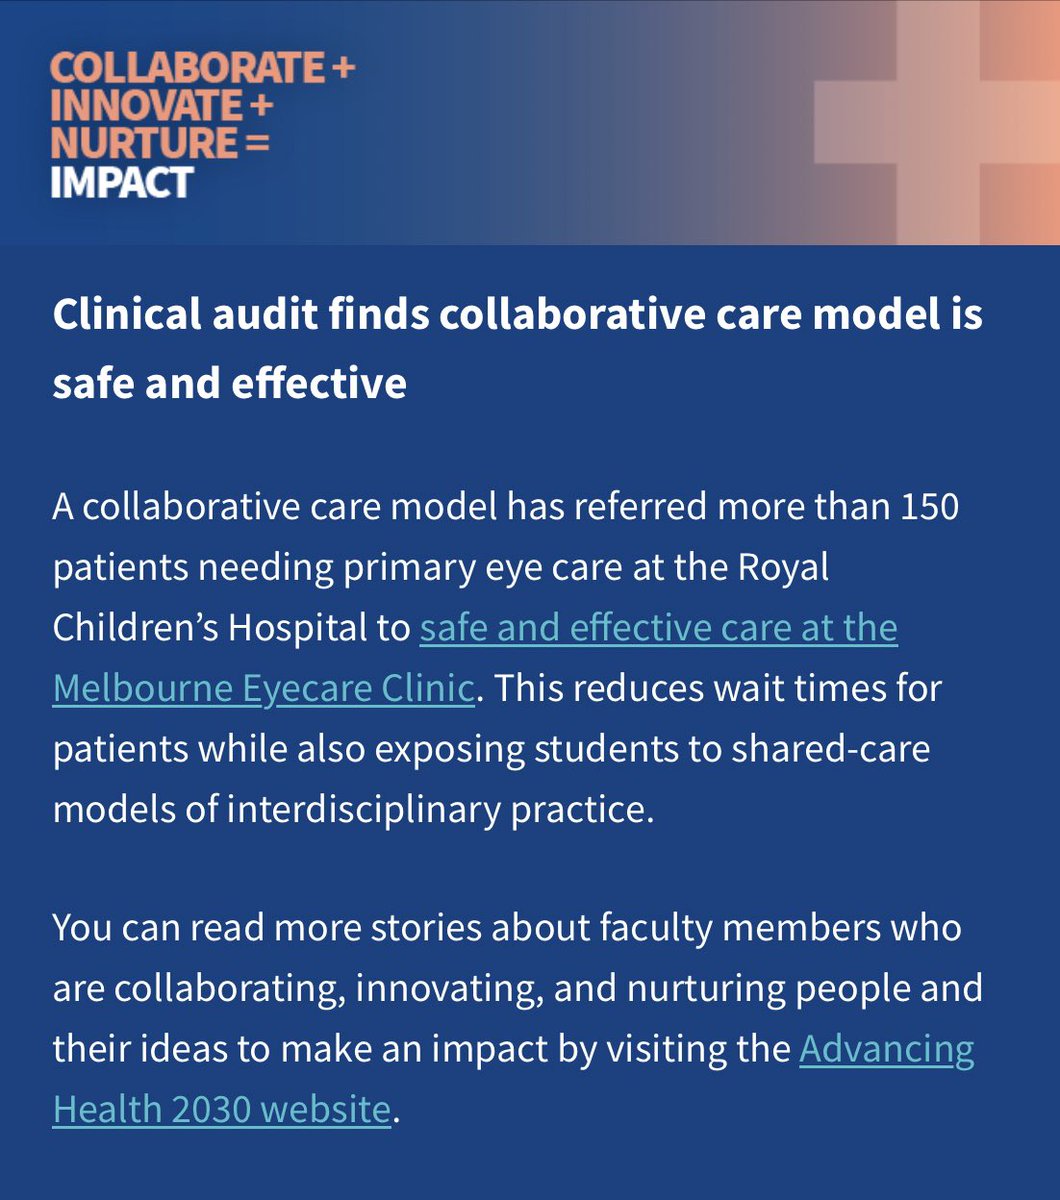 Proud to be part of this clinical audit showcasing collaborative care models between optometry & ophthalmology can be safe and effective with excellent patient care. Thanks to the amazing team @MPOrthoptics, Andrew Huhtanen @UniMelbDOVS & @RCHMelbourne 📰: mdhs.unimelb.edu.au/advancing-heal…